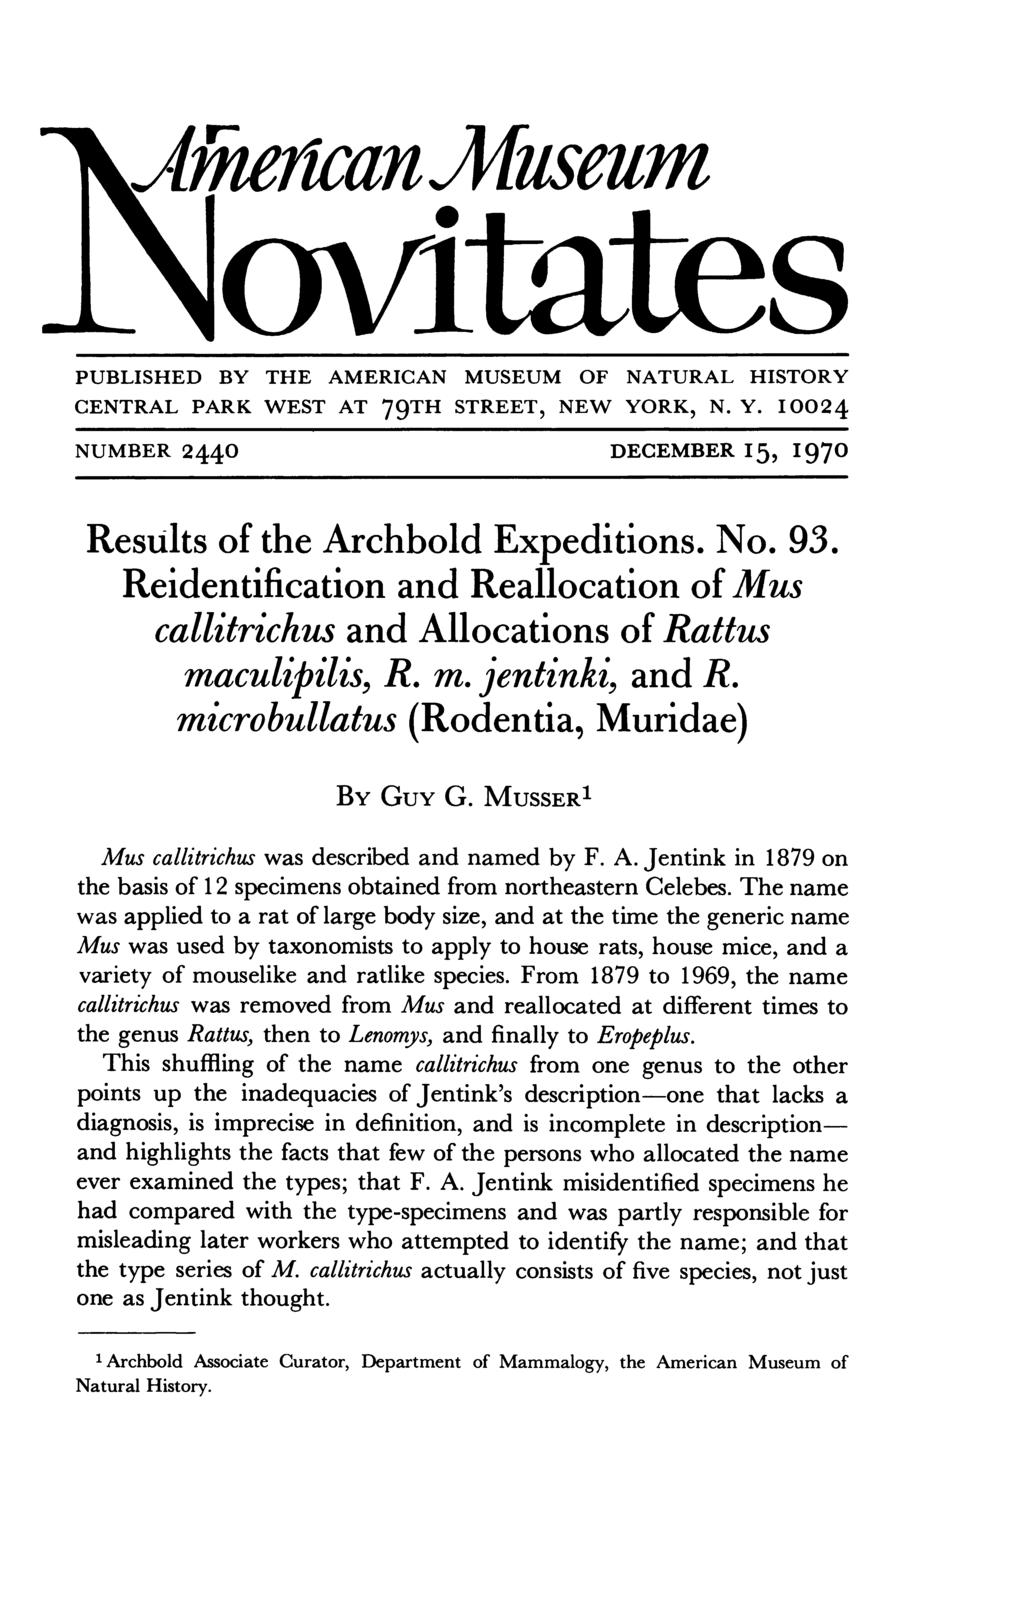 R MAiiiian JMIIsCIIm ovnitates PUBLISHED BY THE AMERICAN MUSEUM OF NATURAL HISTORY CENTRAL PARK WEST AT 79TH STREET, NEW YORK, N. Y. I0024 NUMBER 2440 DECEMBER I5, I970 Results of the Archbold Expeditions.